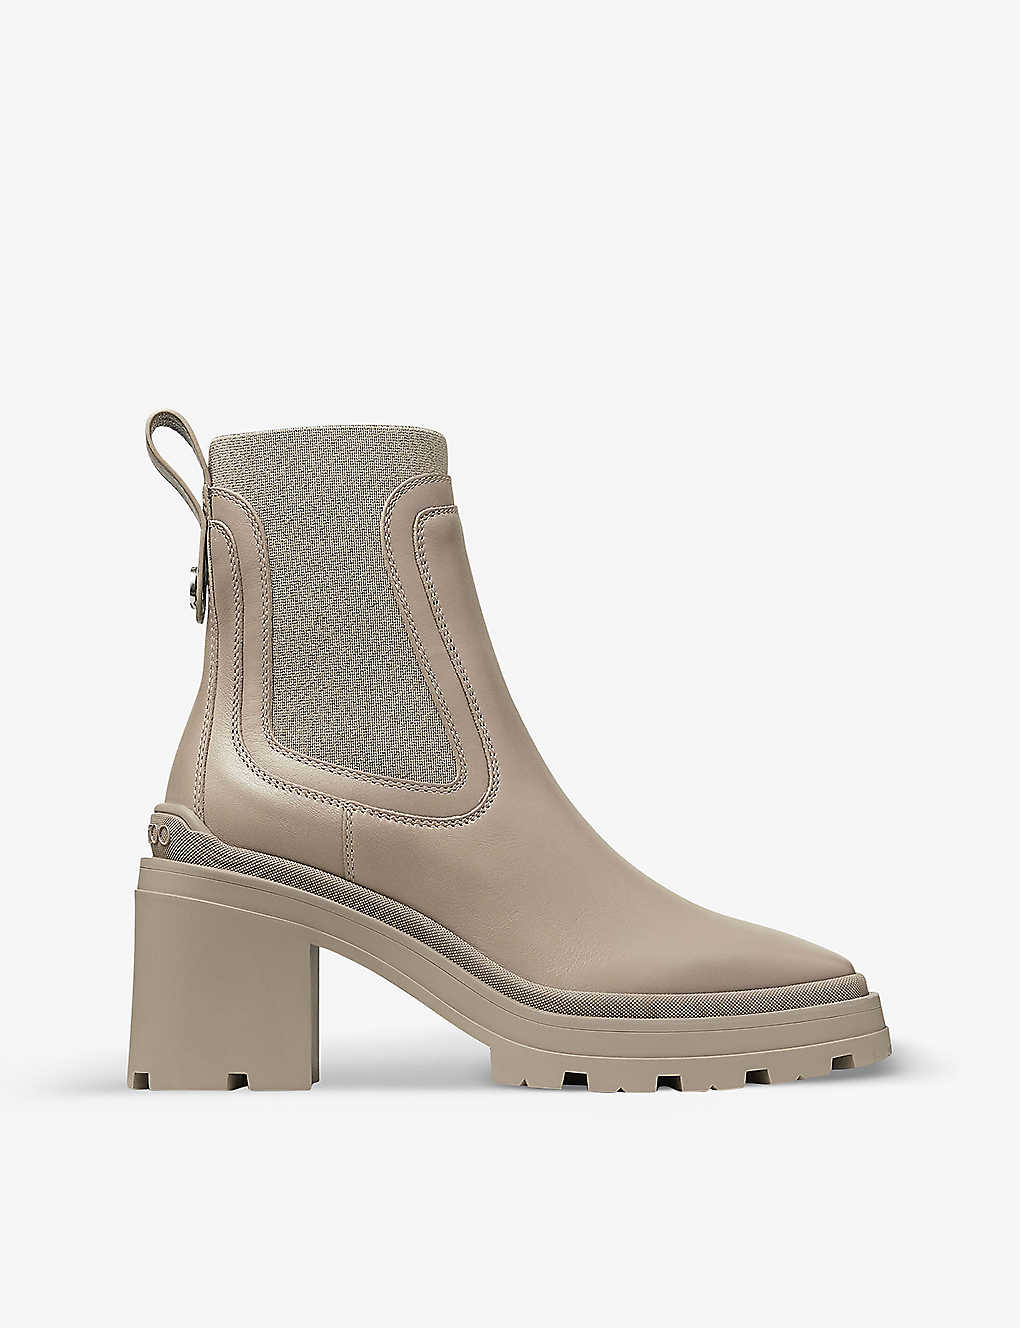 JIMMY CHOO JIMMY CHOO WOMENS TAUPE VERONIQUE BRAND-PLAQUE LEATHER HEELED ANKLE BOOTS